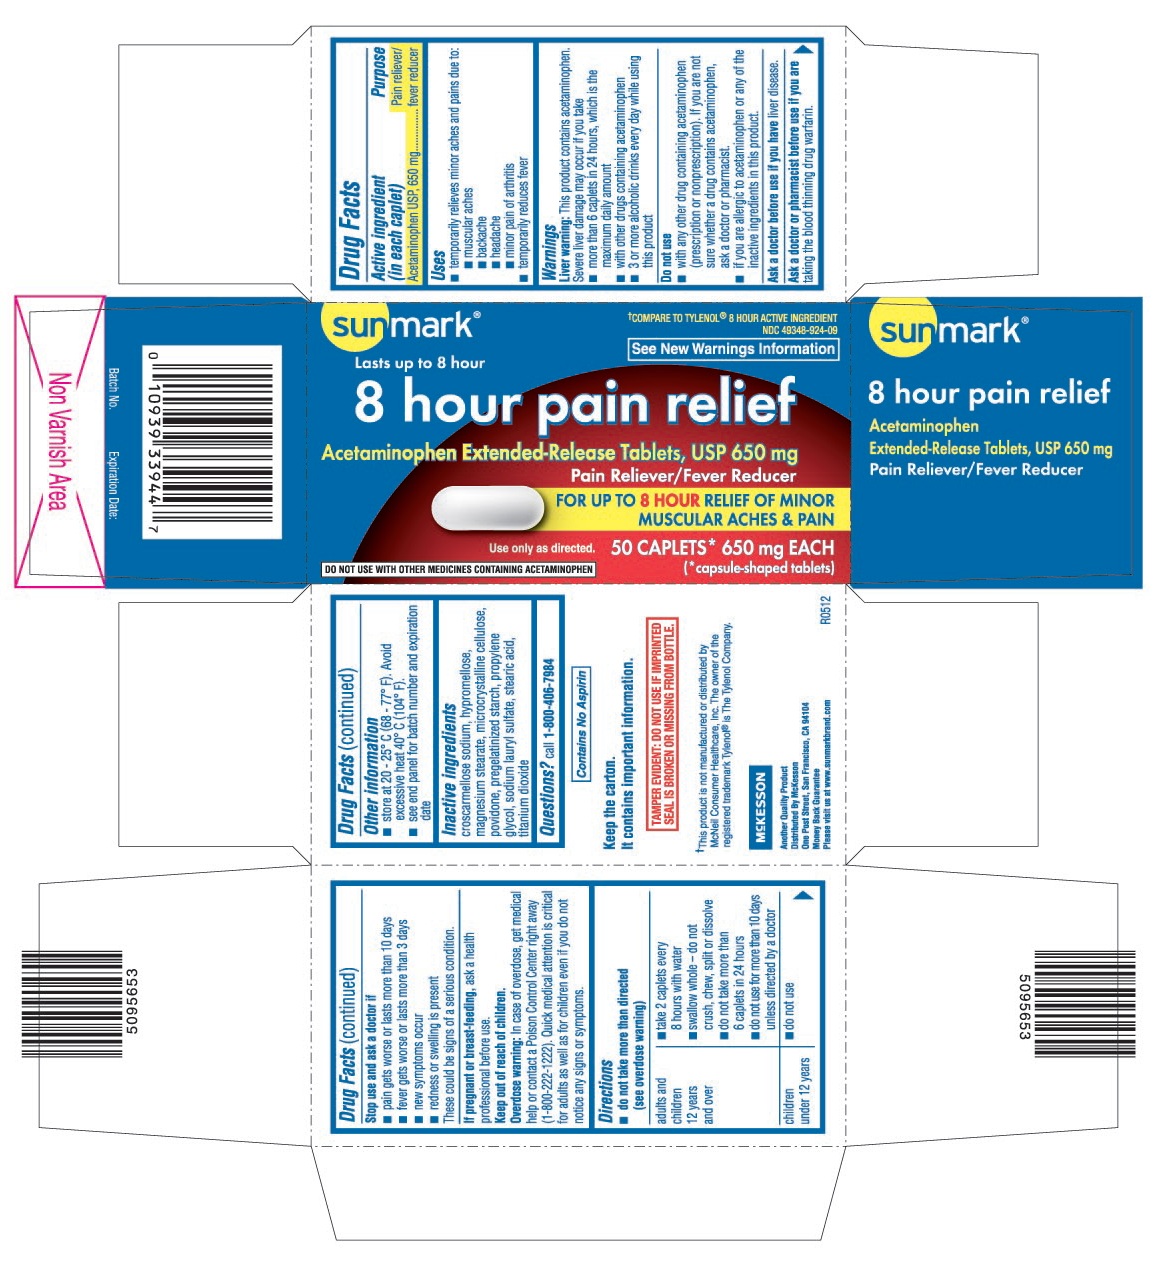 This is the 50 count bottle carton label for Sunmark Acetaminophen extended-release tablets, USP 650 mg.